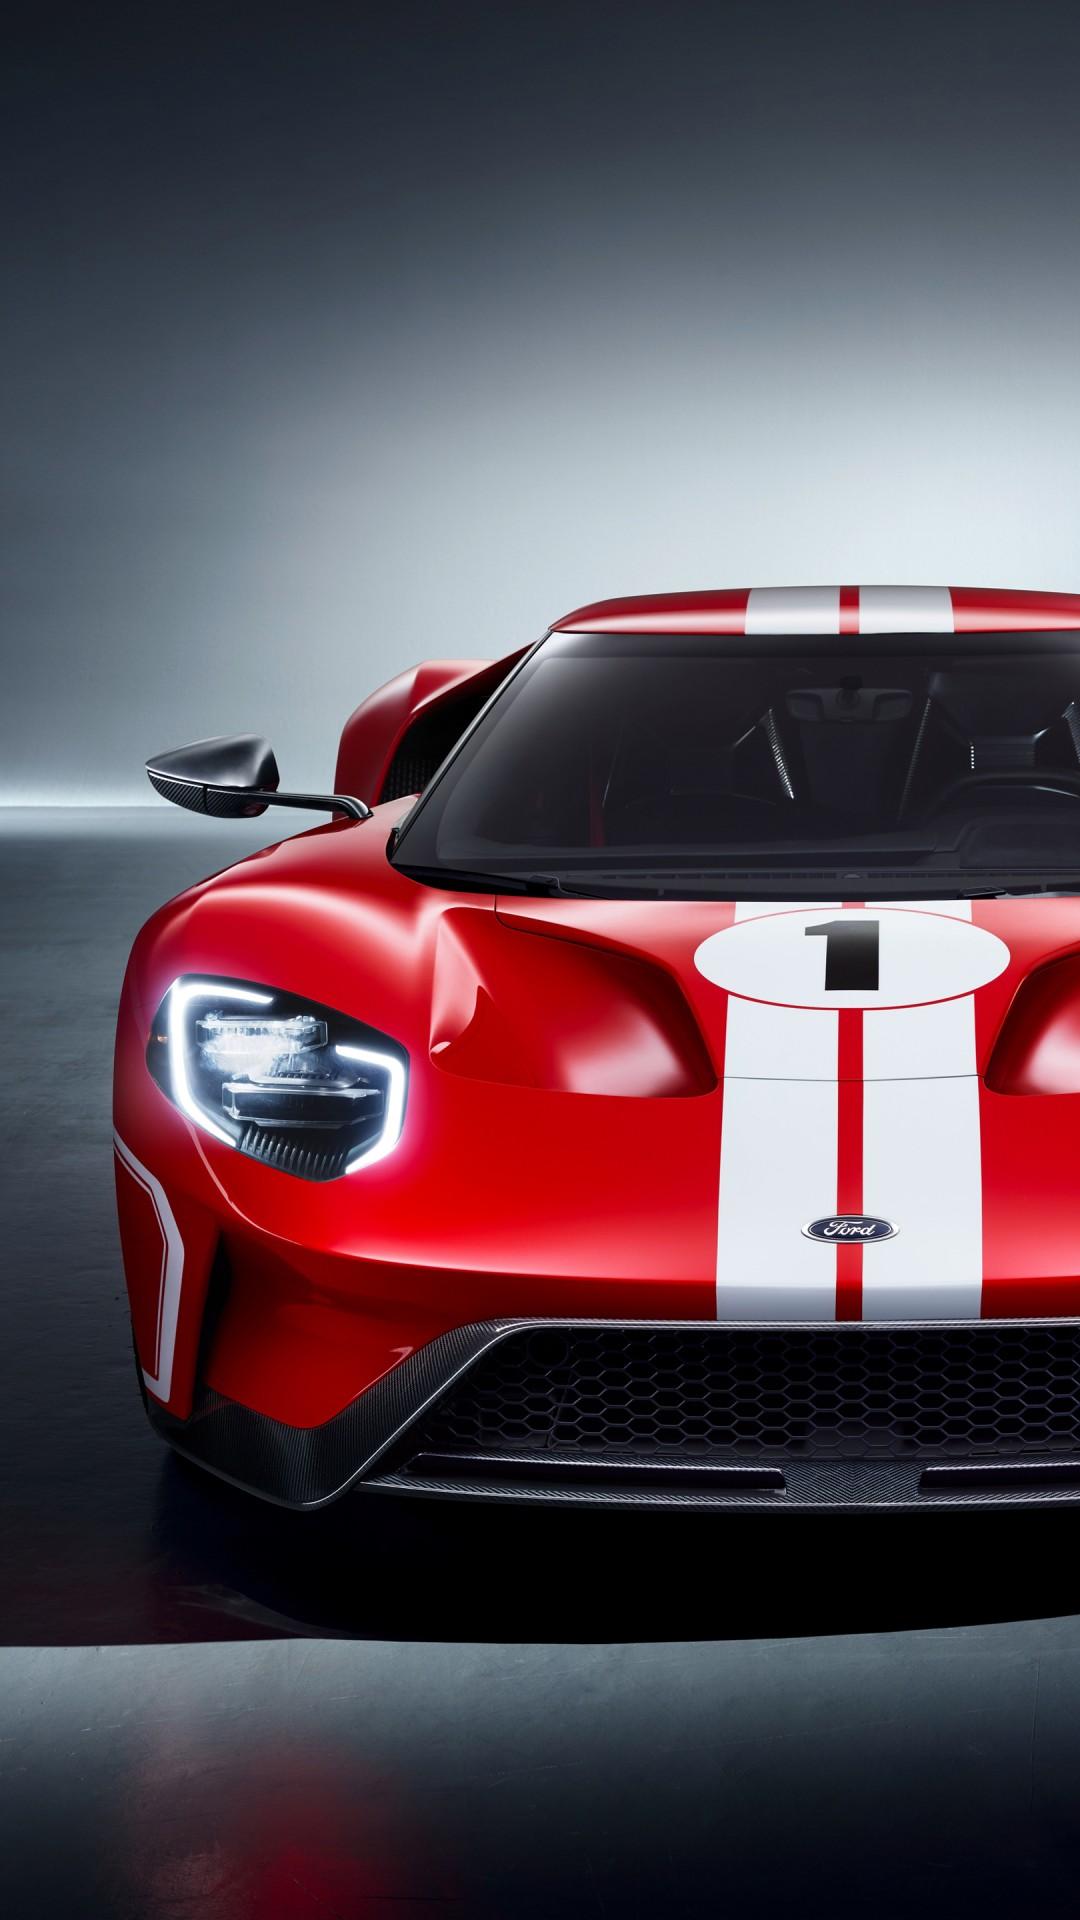 Ford Gt Android Wallpapers Wallpaper Cave